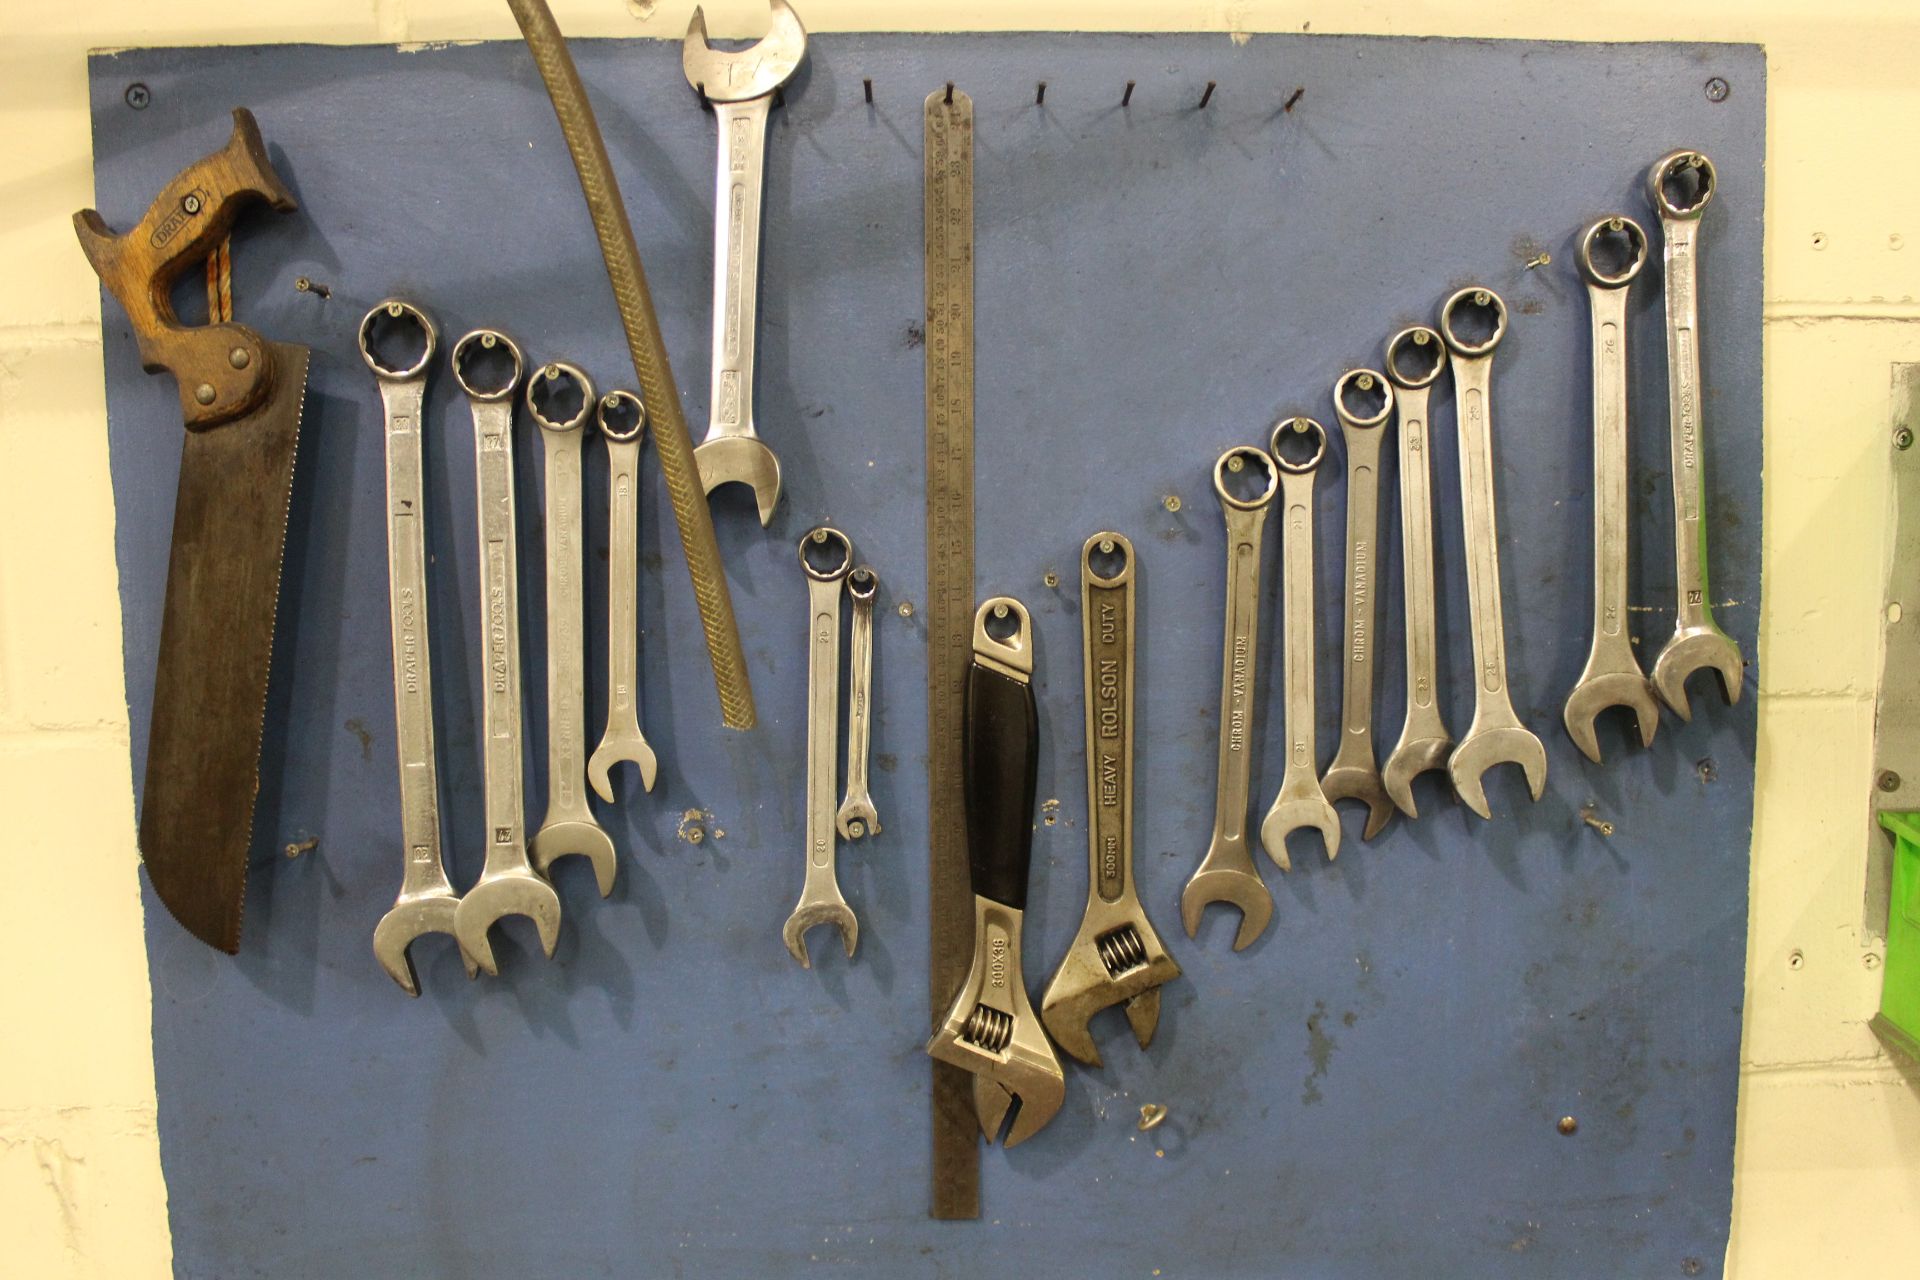 Tool board of various Draper and Chrome-Vandium Wrenches with lin bins of assorted drill bits,